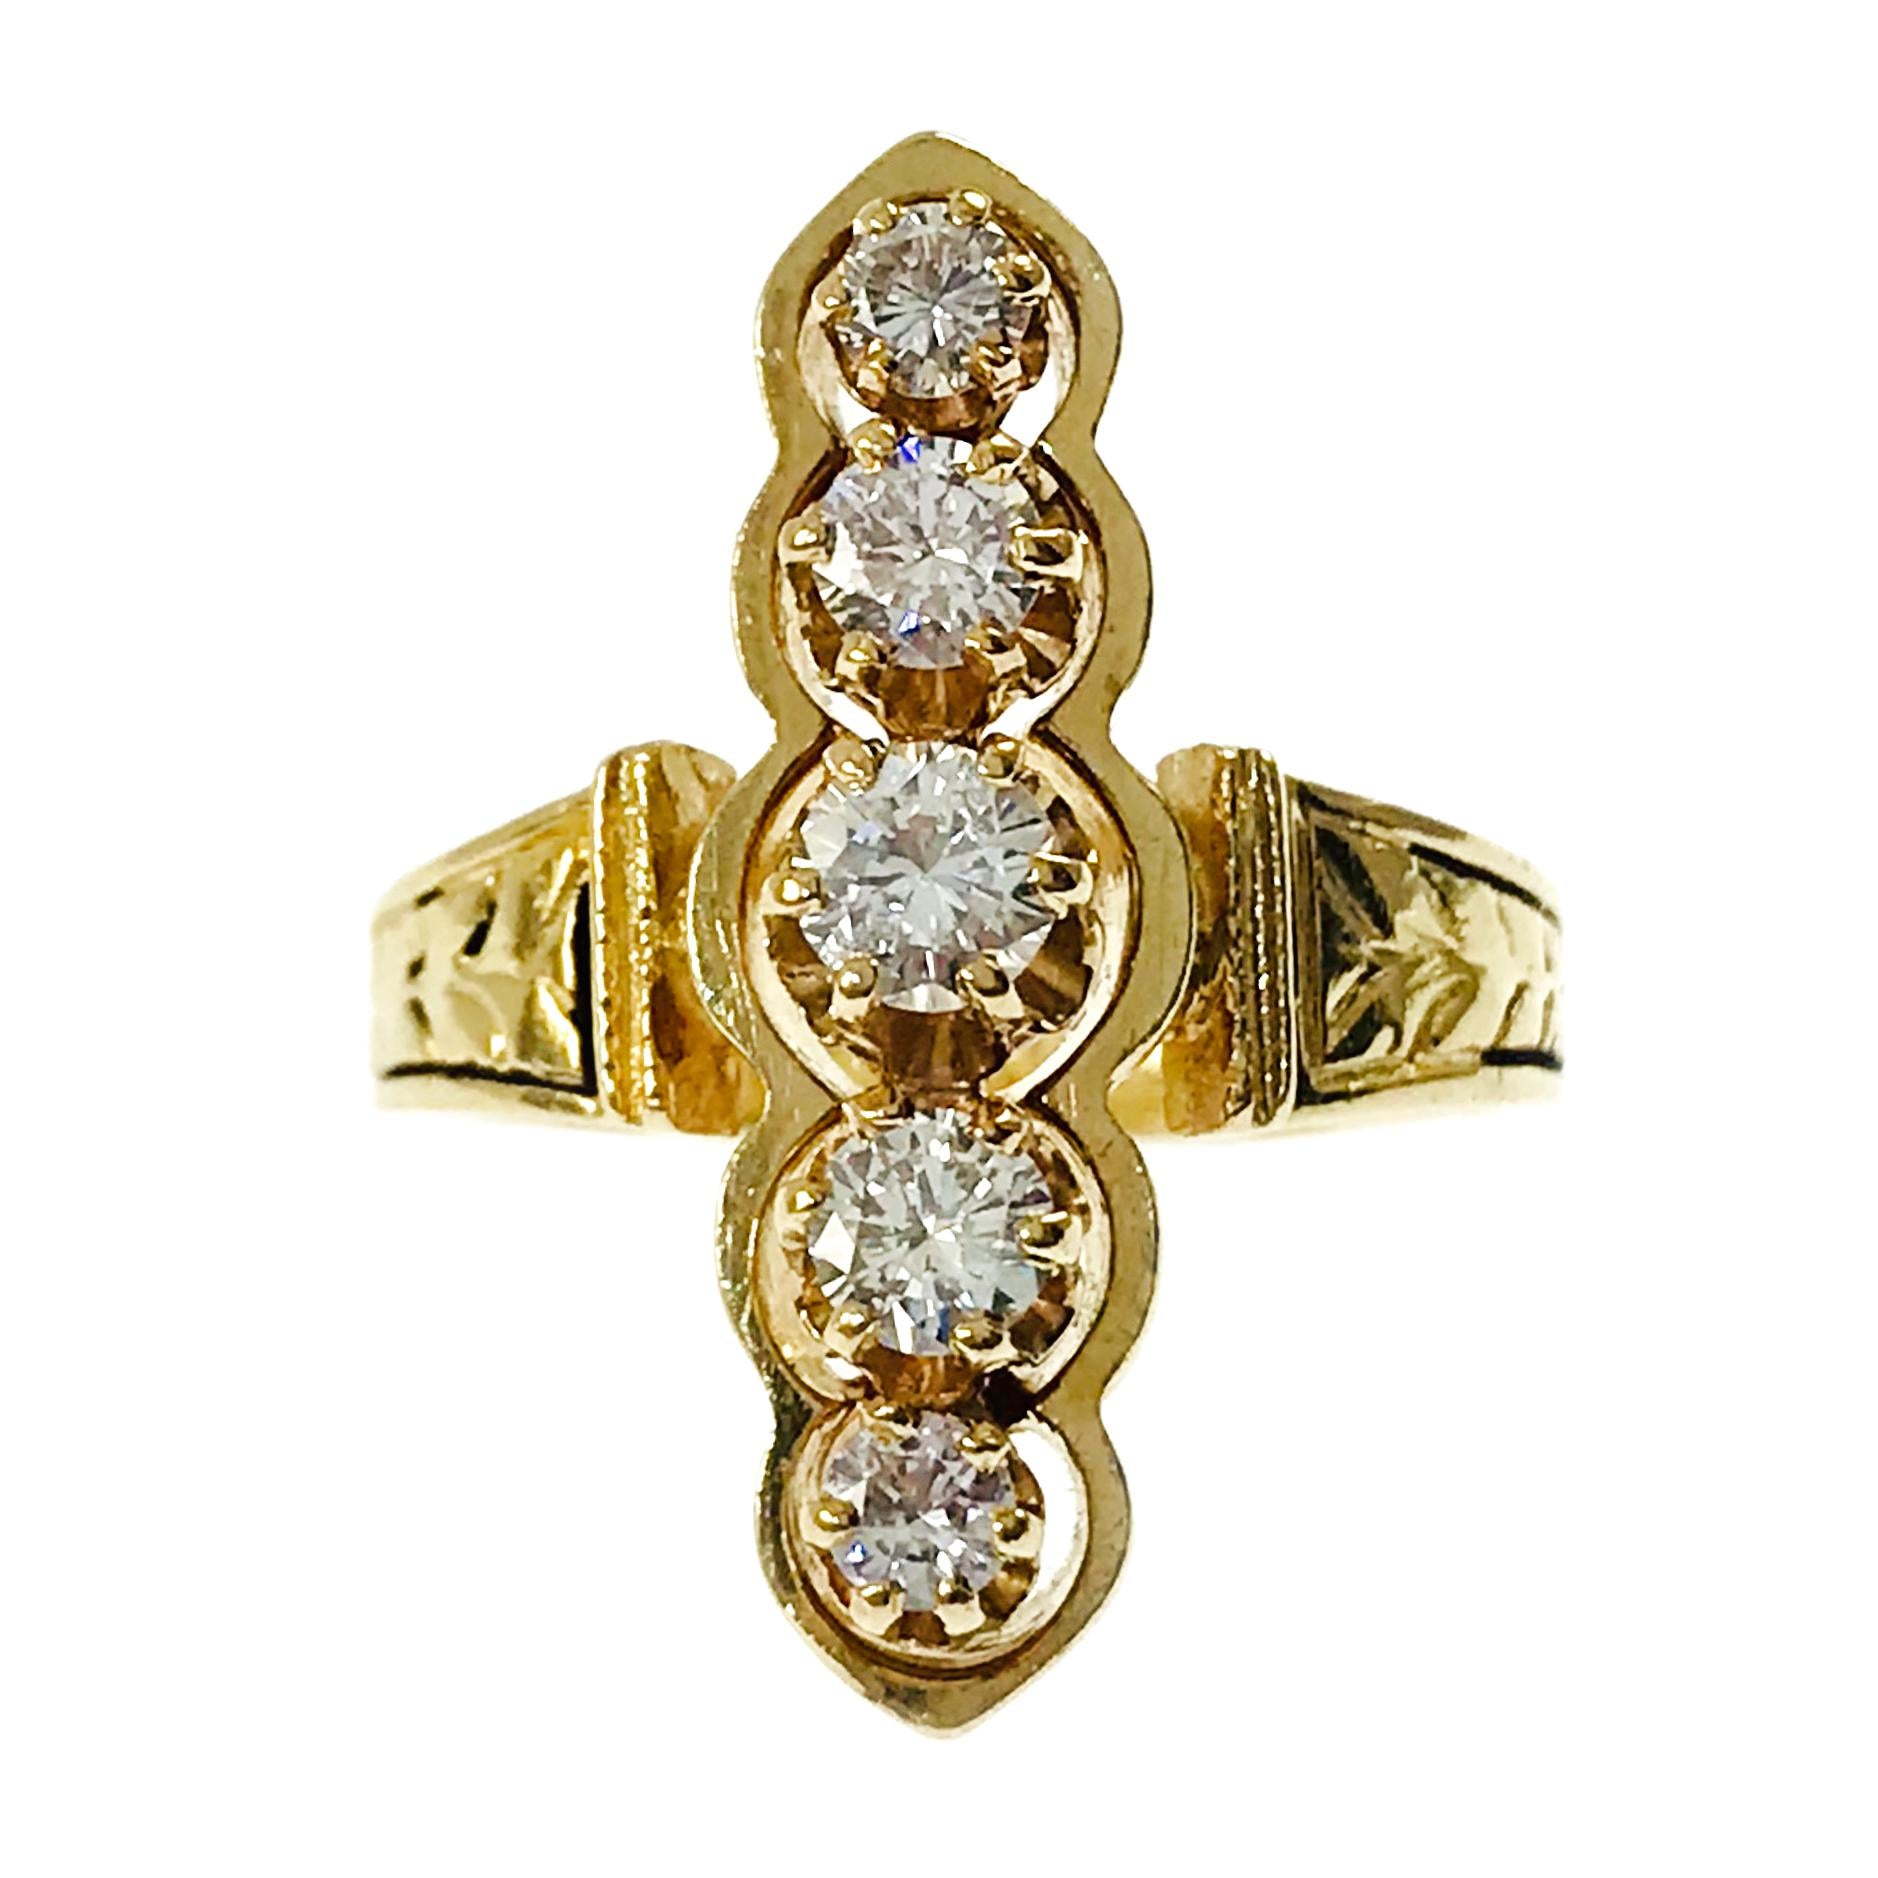 14 Karat Yellow Gold Vertical Five-Diamond Ring. Five graduated diamonds are set vertically in this sensational Victorian ring, diamond sizes range from 3.76mm to 3.00mm for a weight of 0.70ct. Diamonds are set in a 